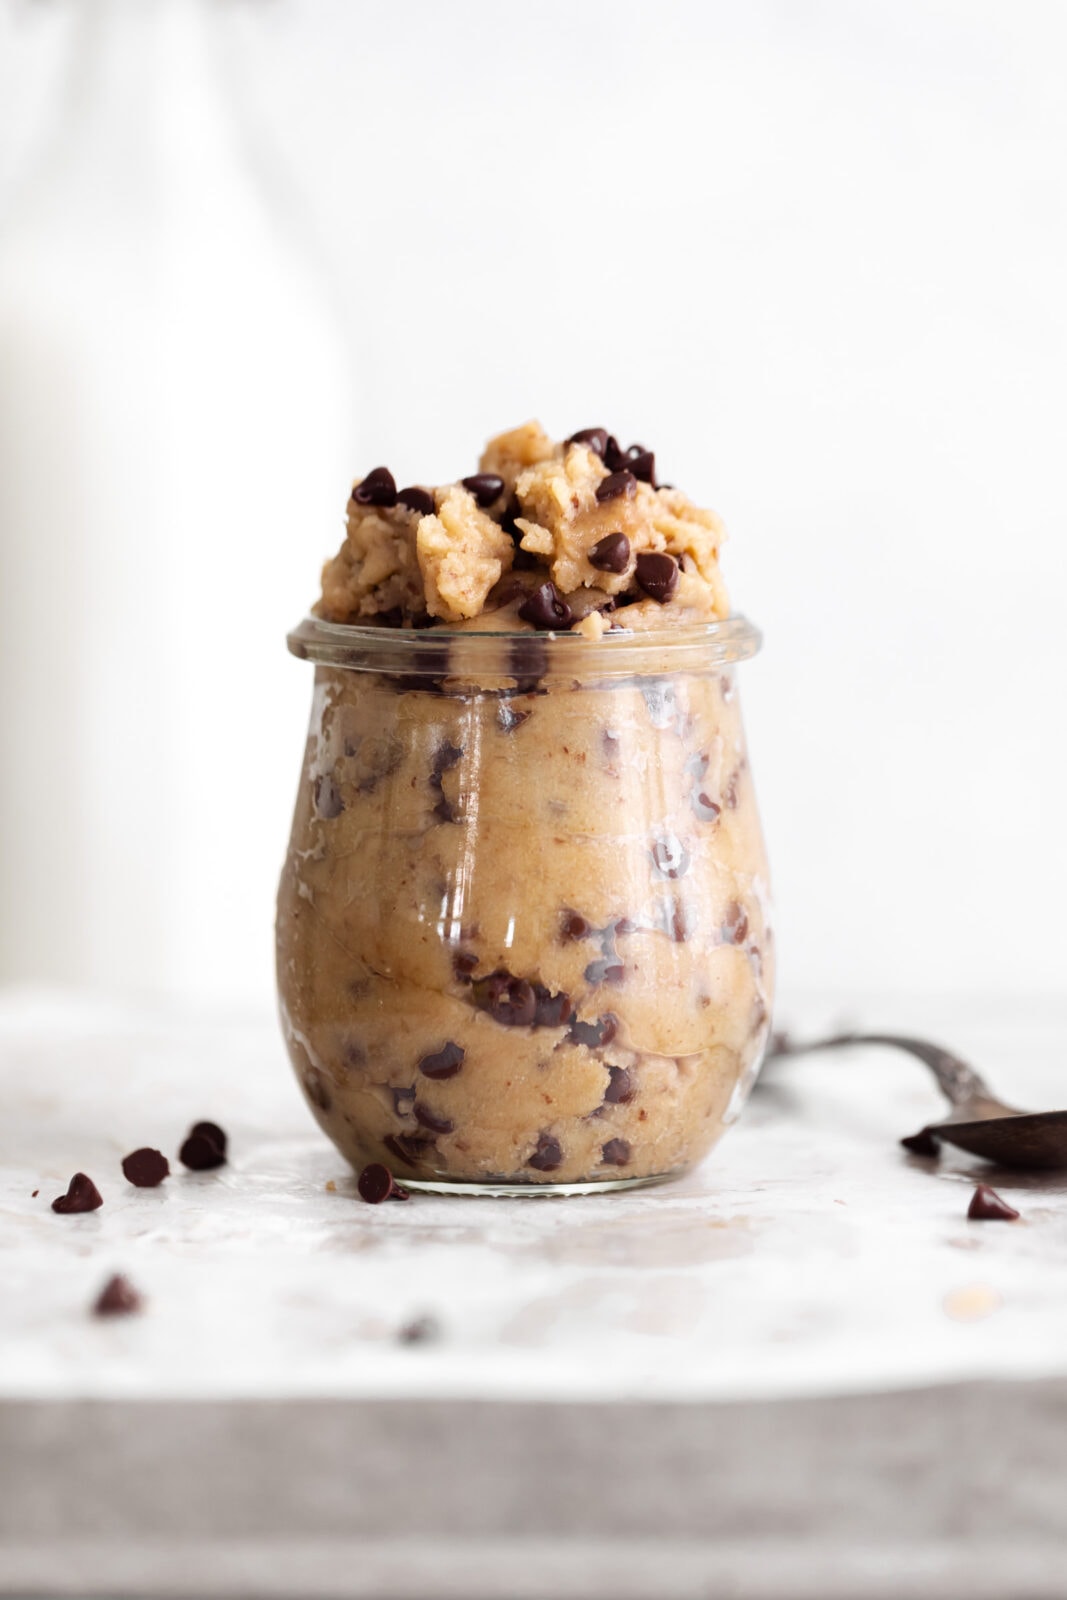 edible cookie dough with chocolate chips in a jar